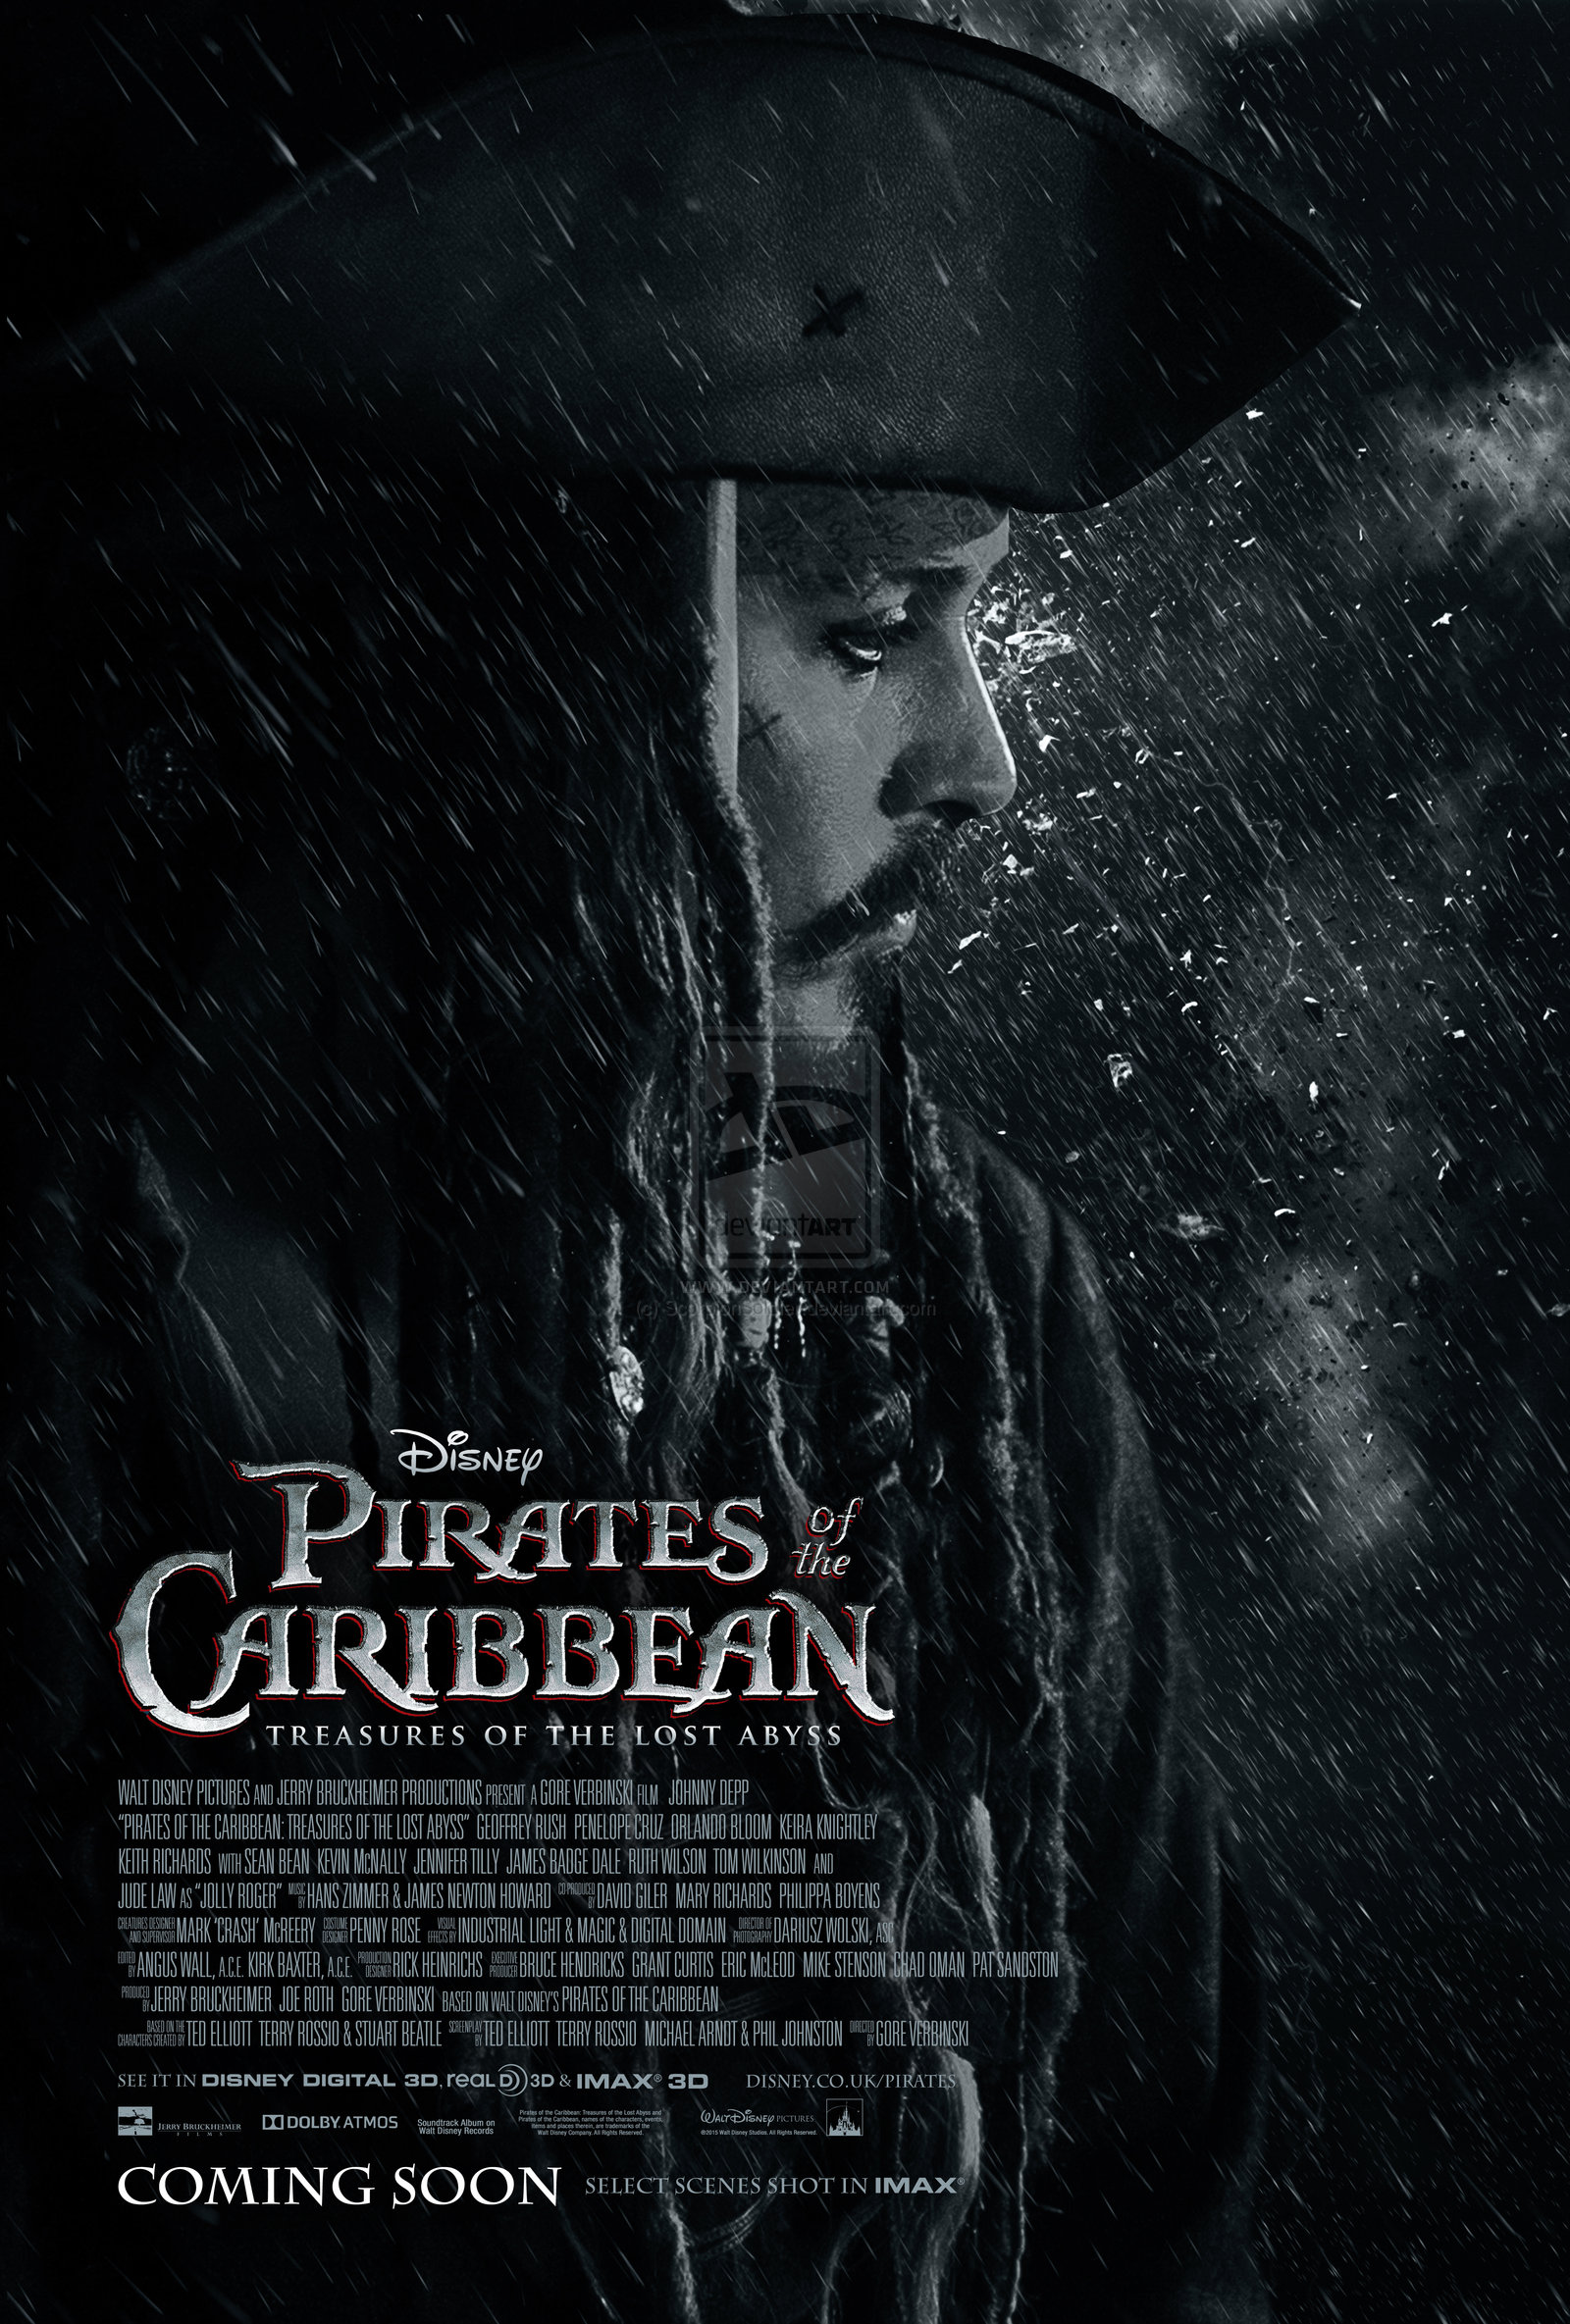 Pirates of the Caribbean: Dead Man’s download the new for android